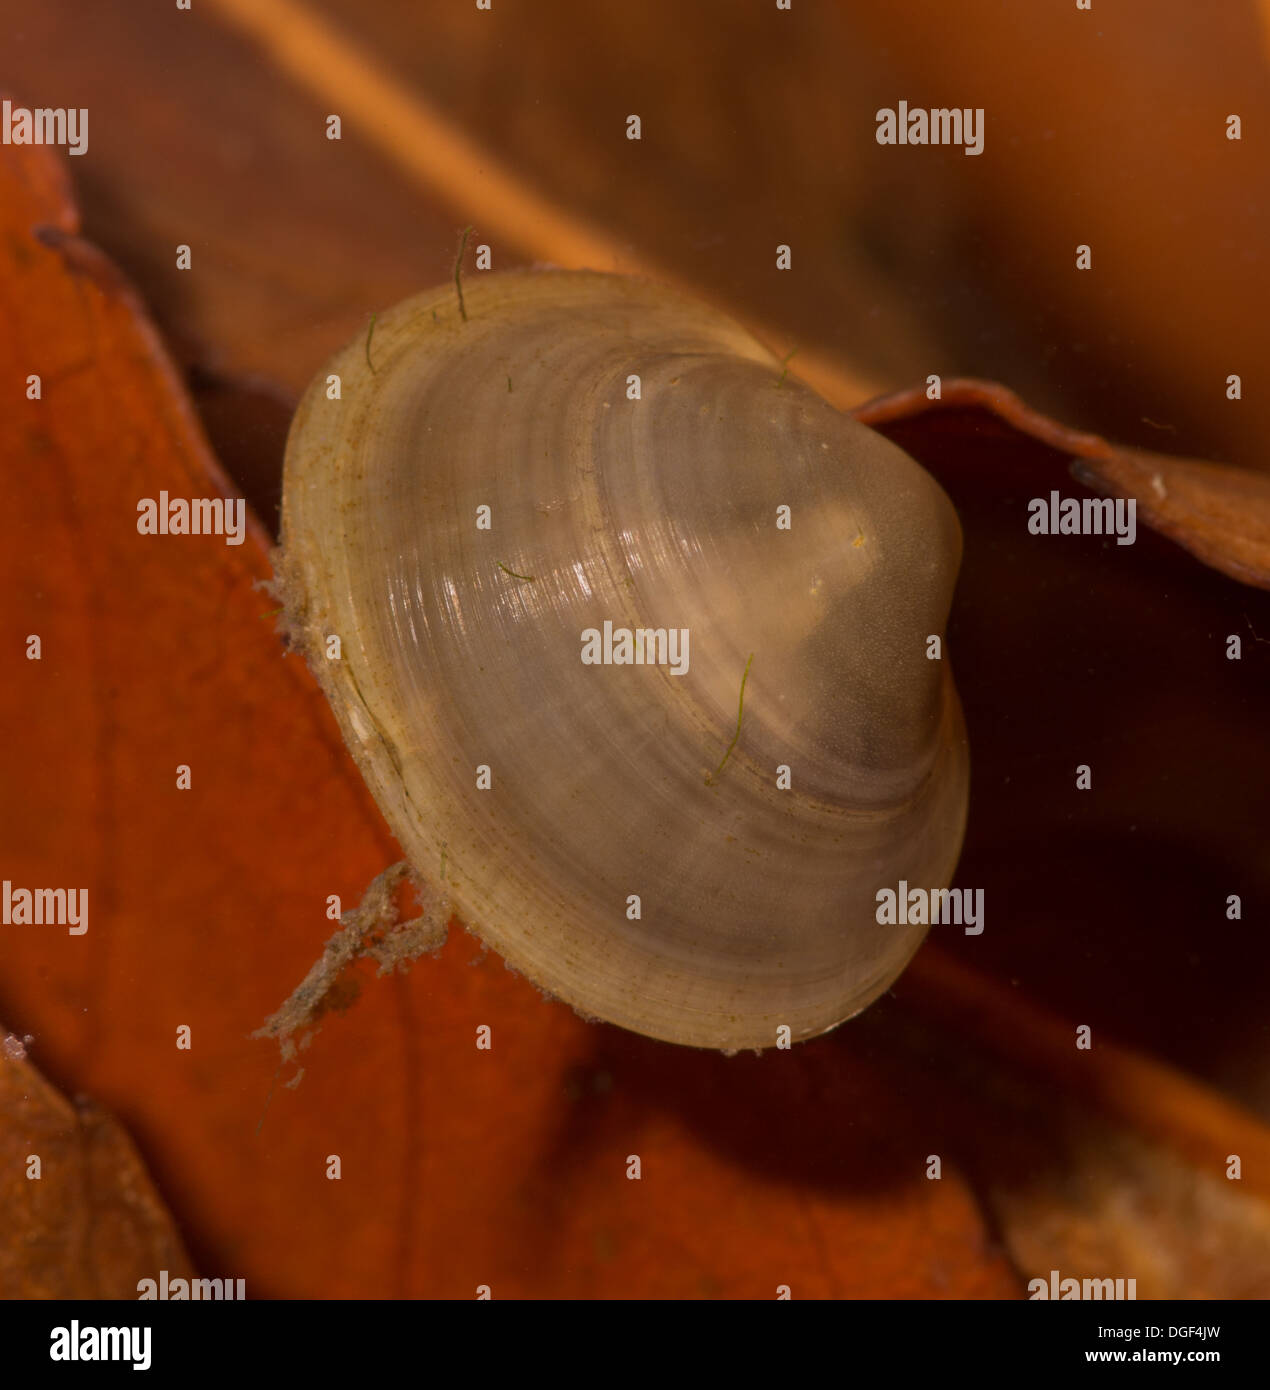 A Pea shell cockle or freshwater clam. Photo taken in an aquarium set up and creature released unharmed afterwards Stock Photo